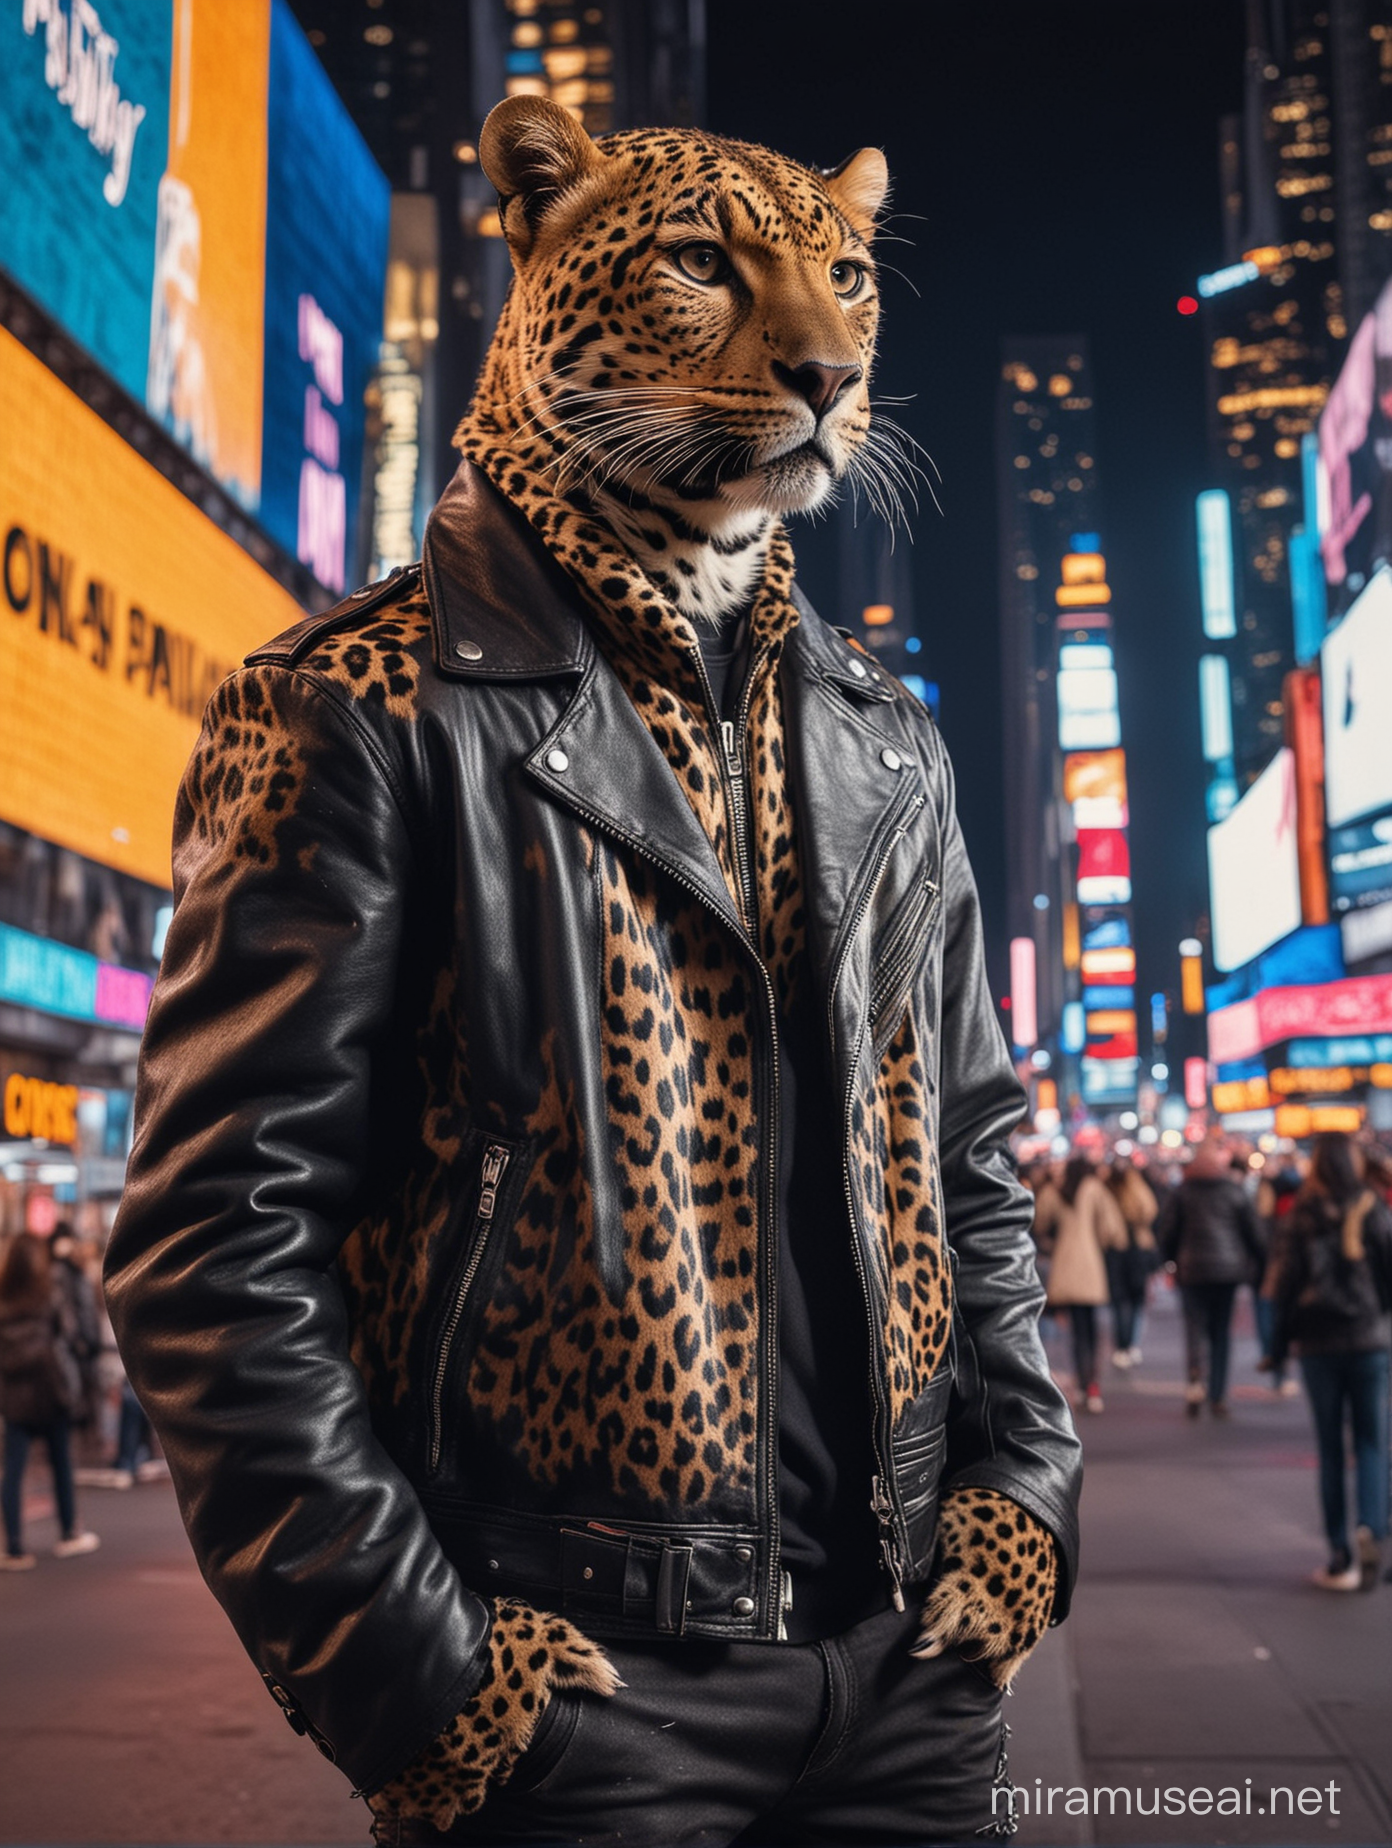 Male Leopard in Leather Jacket Roaming Times Square at Night